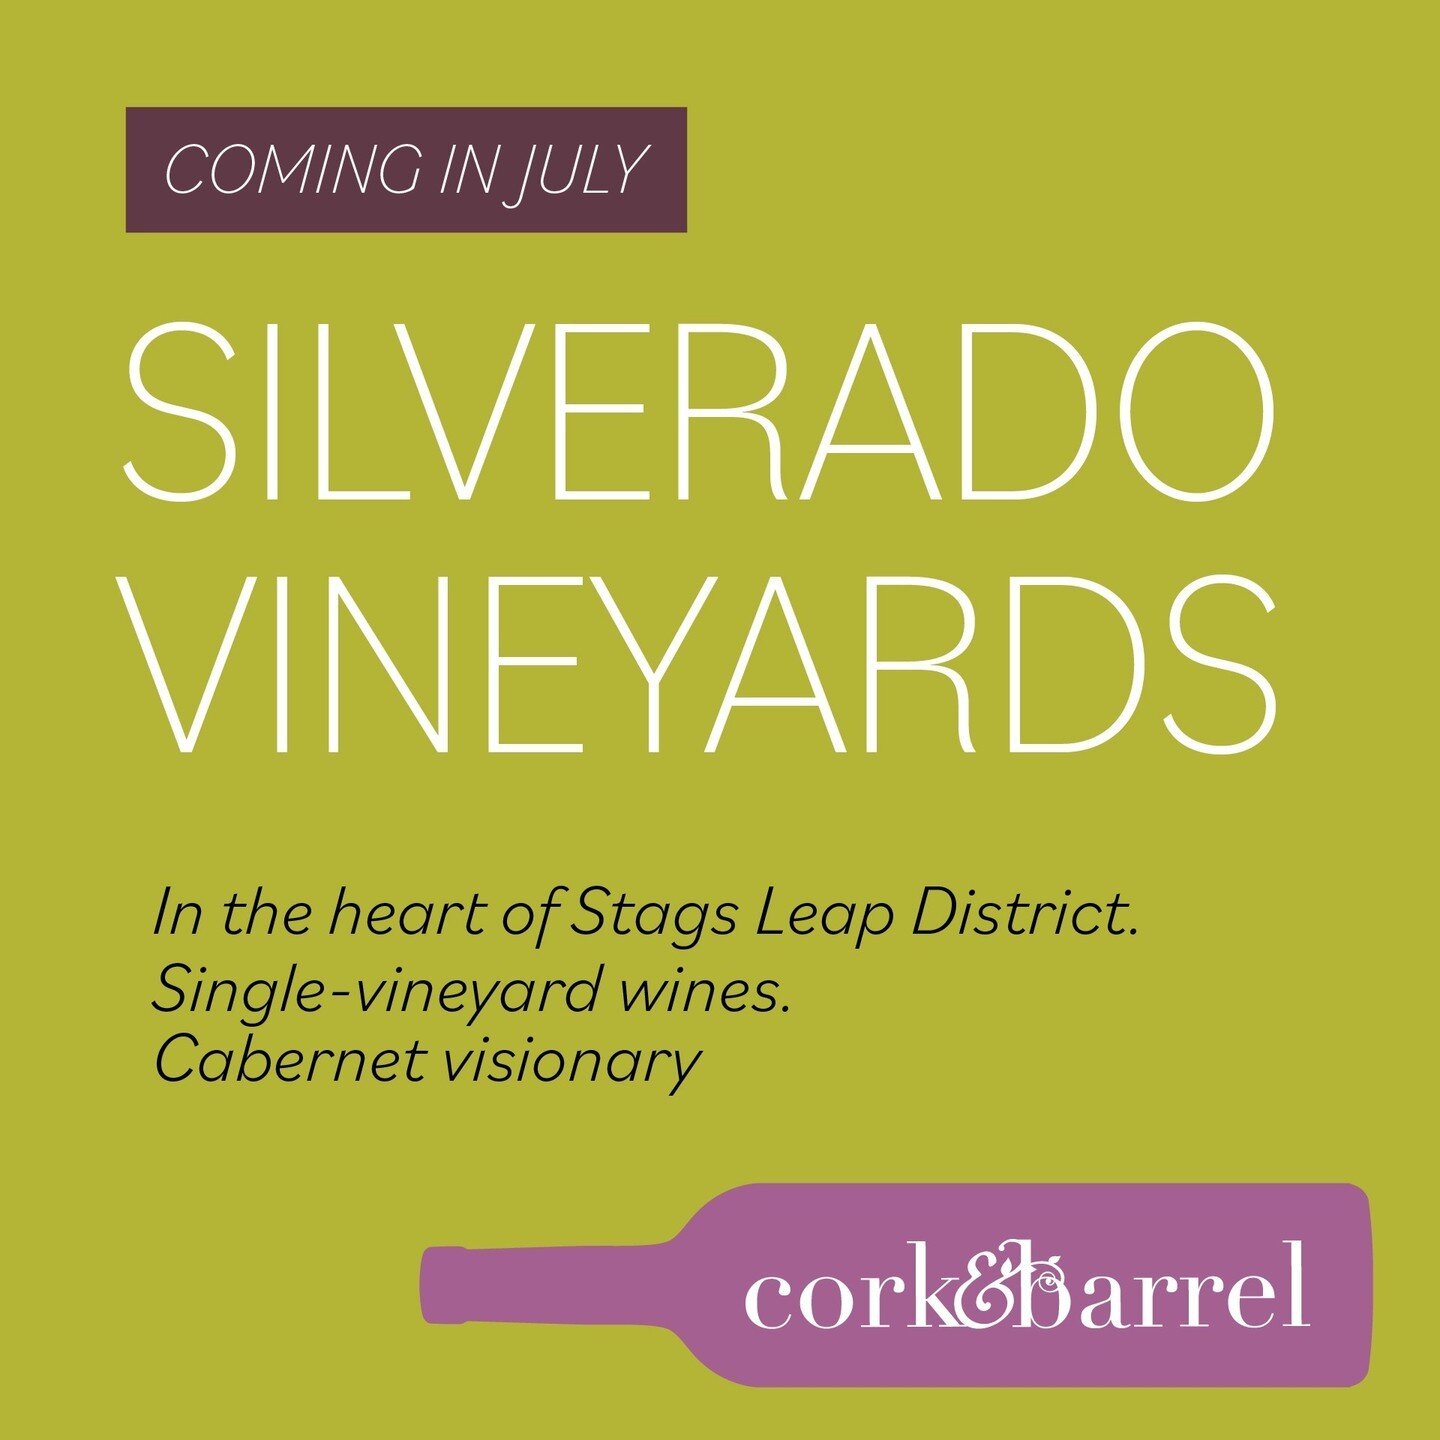 People who know Napa well know about Stags Leap. This special wine district is steeped in history.⁠
⁠
Silverado Vineyards is named after the historic mining town that overlooks Napa Valley. Silverado was one of the first to plant Cabernet in Stags Le